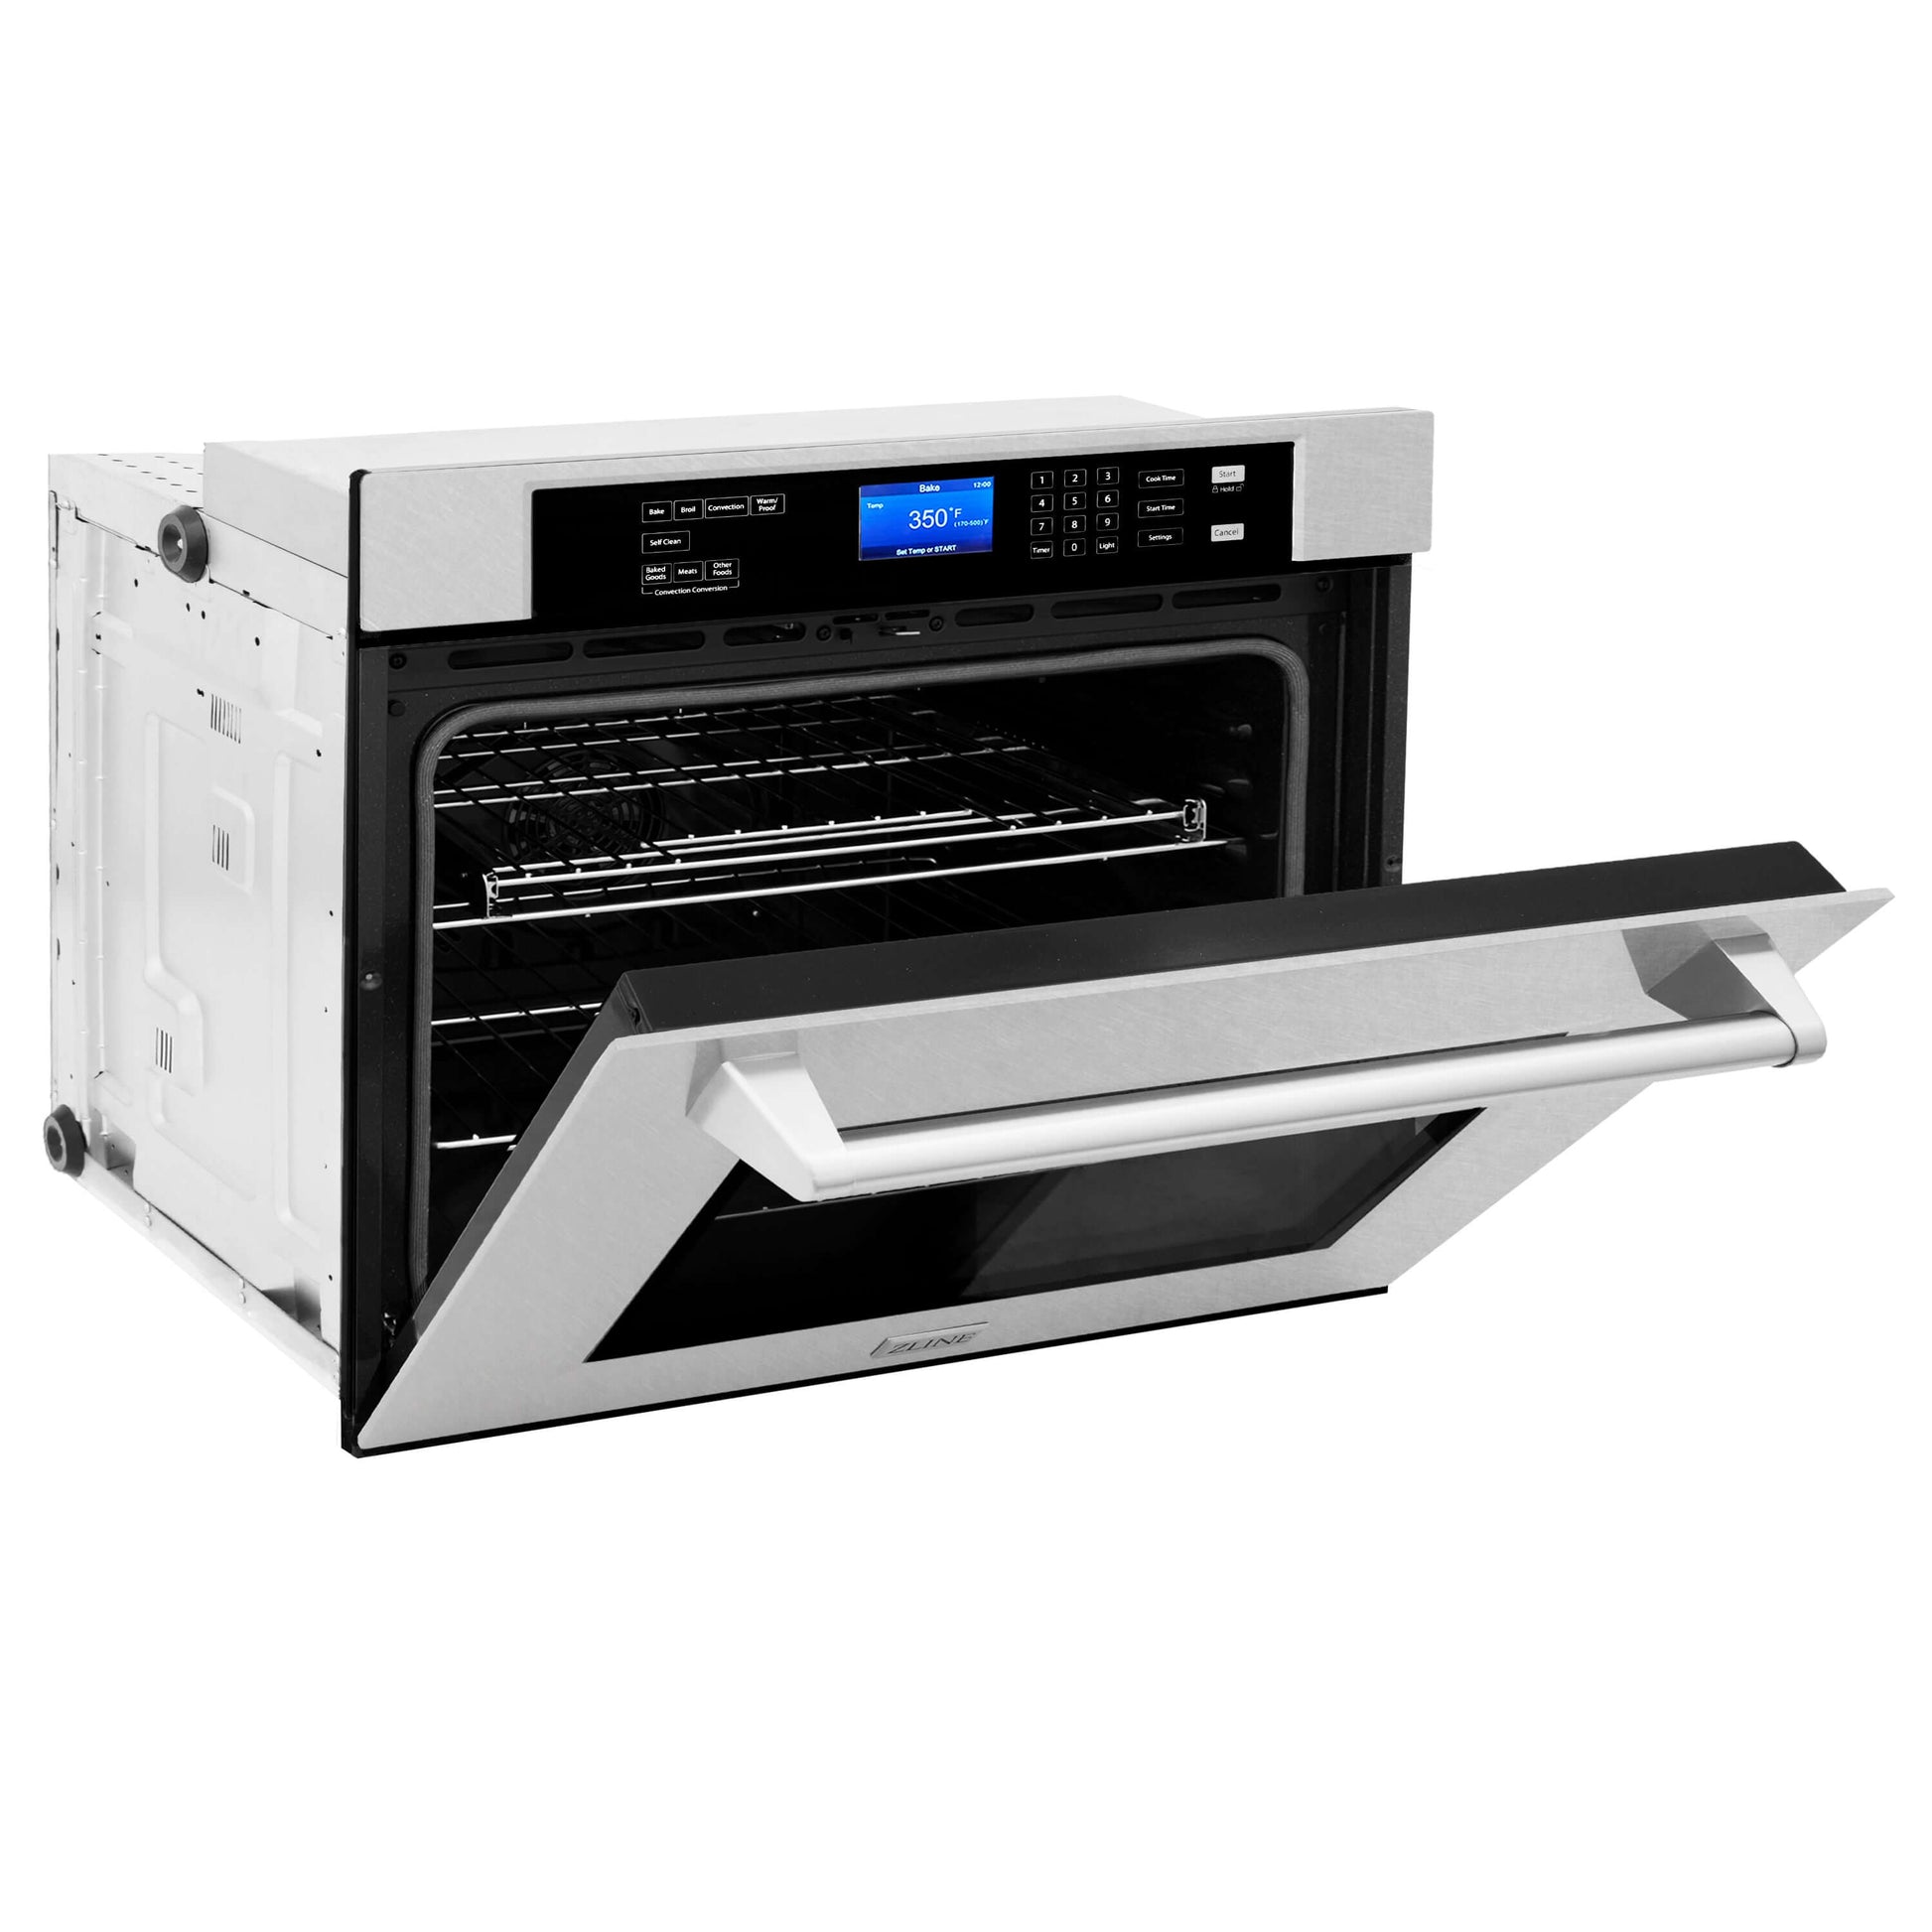 ZLINE 30 in. Professional Electric Single Wall Oven with Self Clean and True Convection in Fingerprint Resistant Stainless Steel (AWSS-30) side, half open.